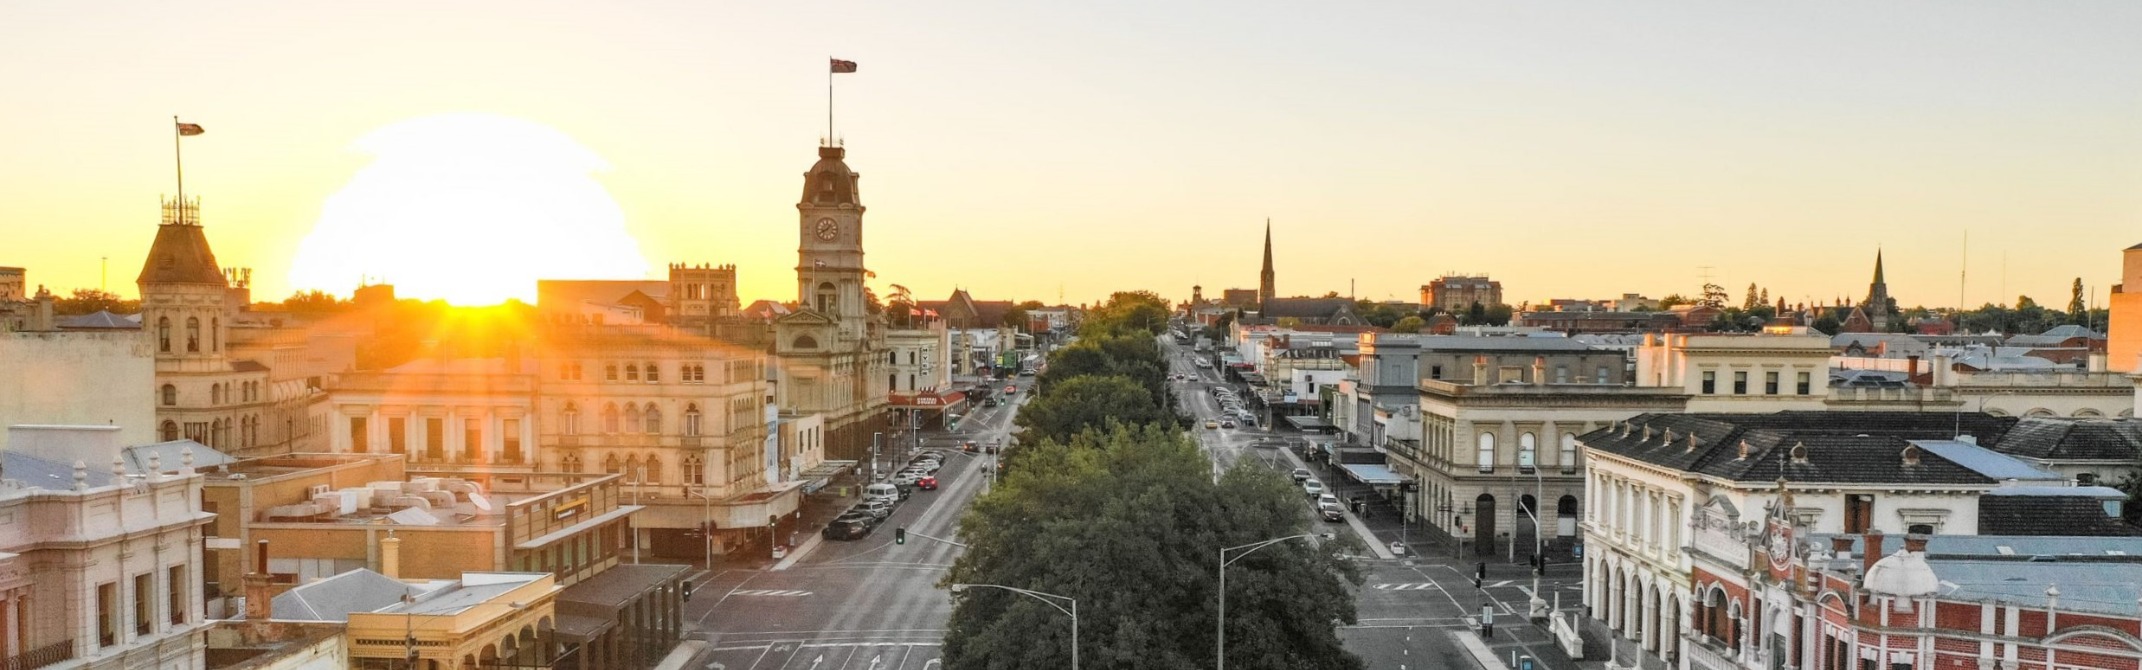 A city street in Ballarat at sunset, with buildings and cars creating a vibrant urban scene.